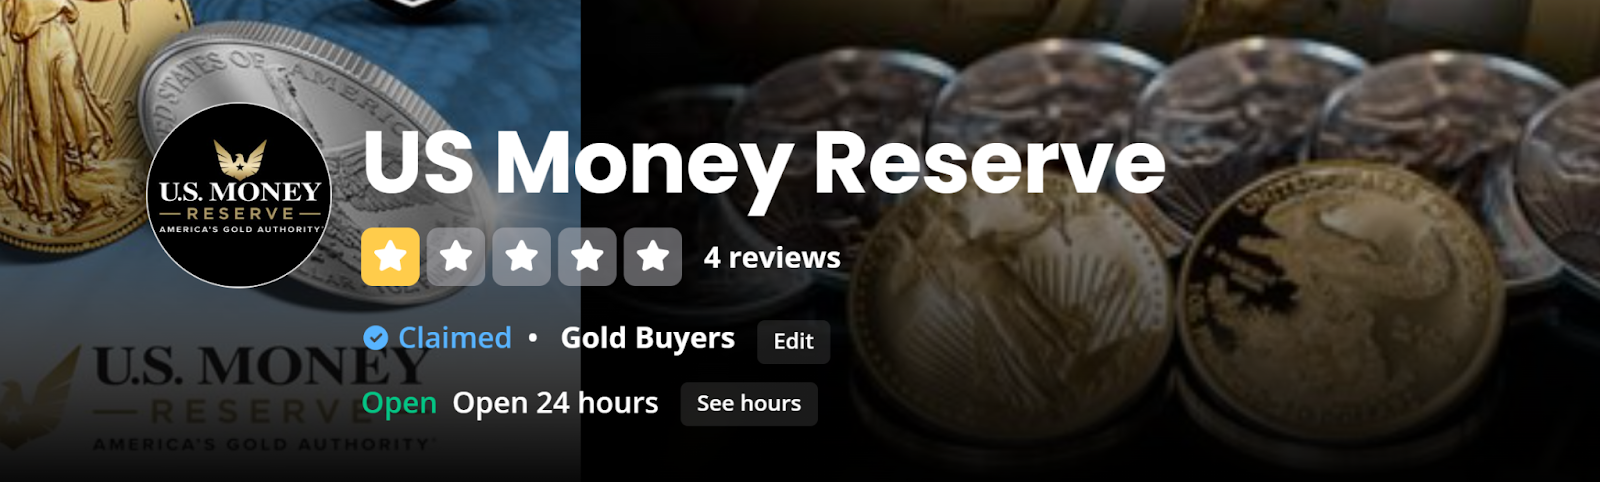 US Money Reserve reviews on Yelp. They have a 1 out of 5-stars rating.